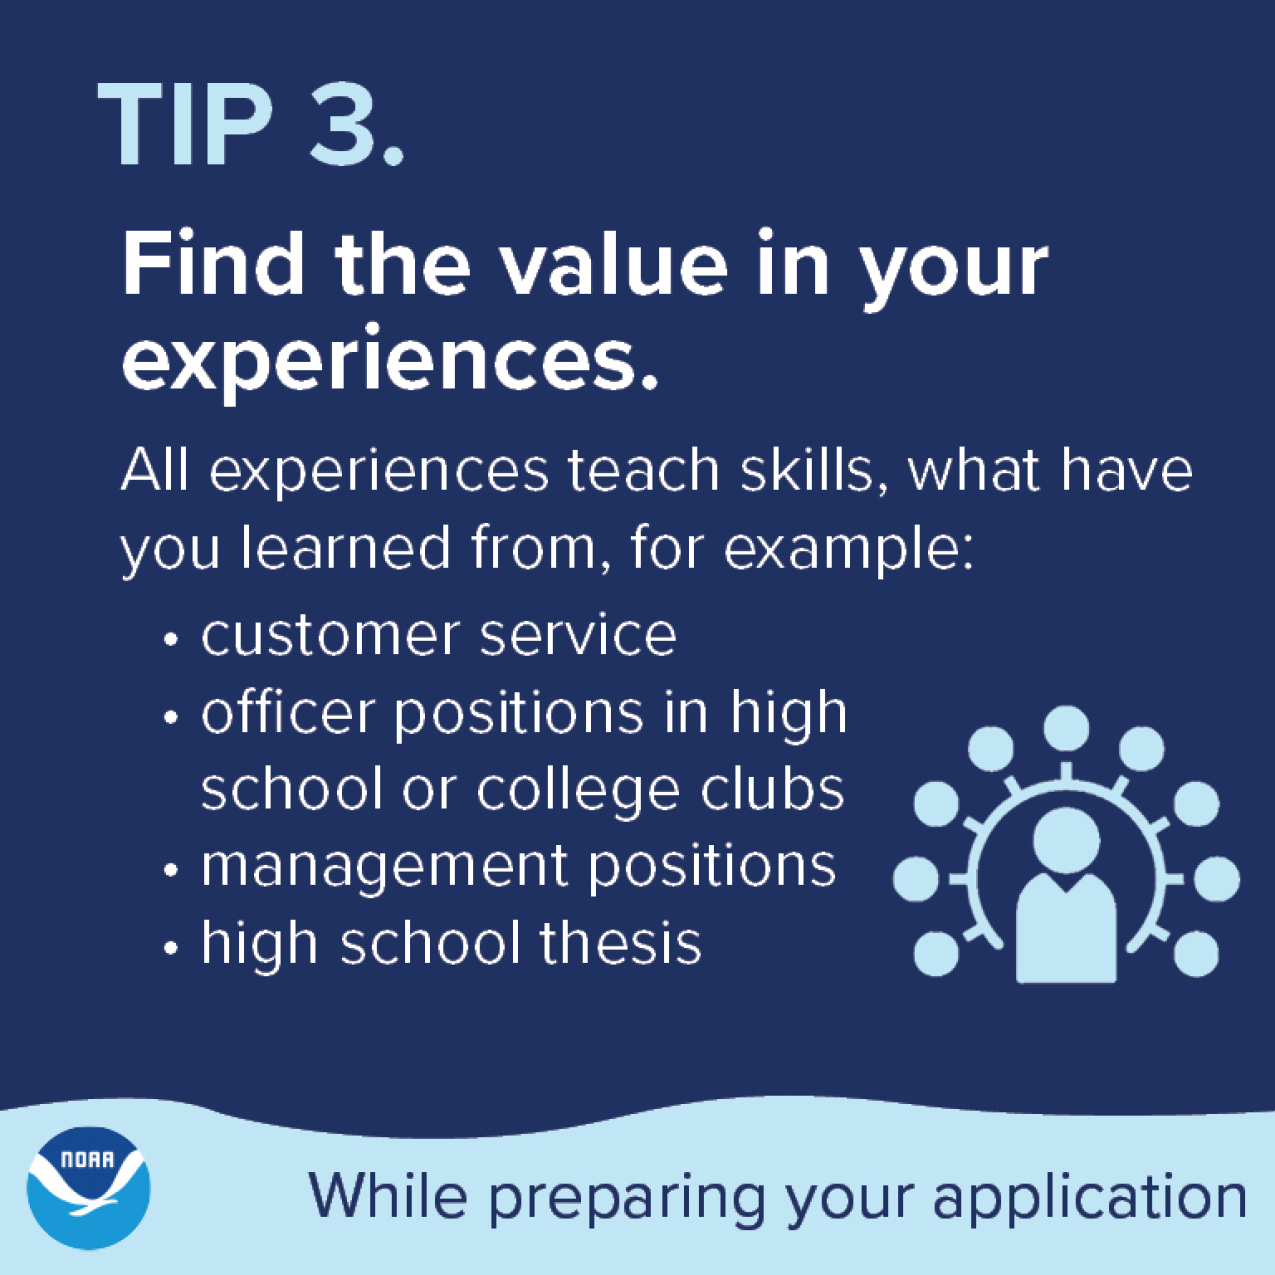 Tip 3. Find the value in your experiences. All experiences develop your skills, including: customer service, officer positions in high school or college clubs, management positions, high school thesis.